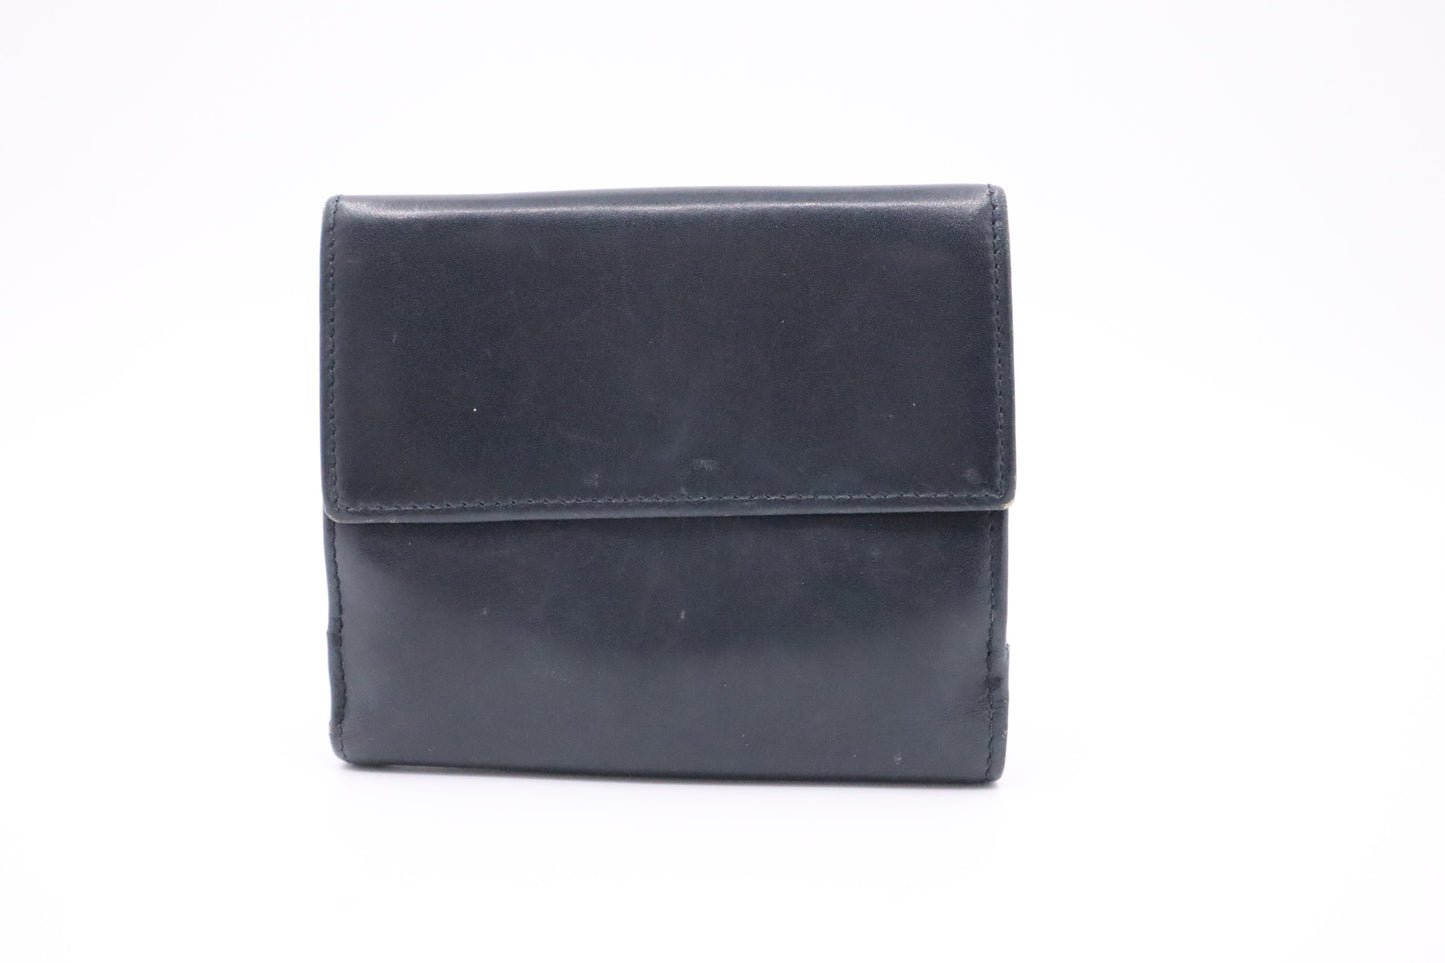 Gucci Compact Wallet in Dark Blue Leather